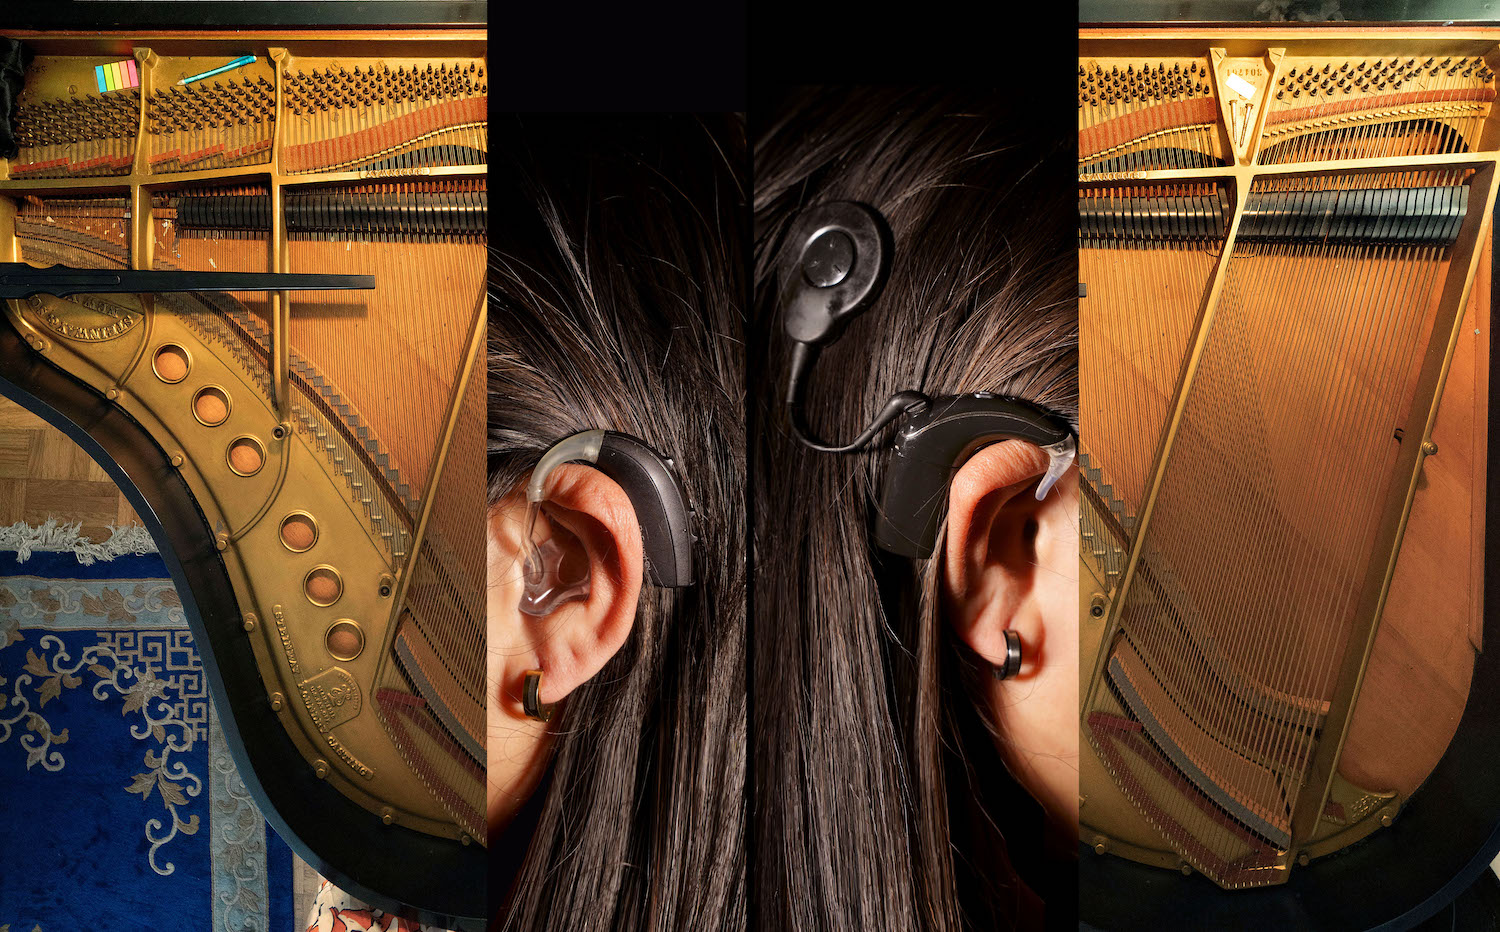 The center of the image shows reflected views of a woman’s ears with long dark hair cascading over them, one wearing a hearing aid and the other a cochlear implant processor. The string and soundboard of a grand piano flanks each side.